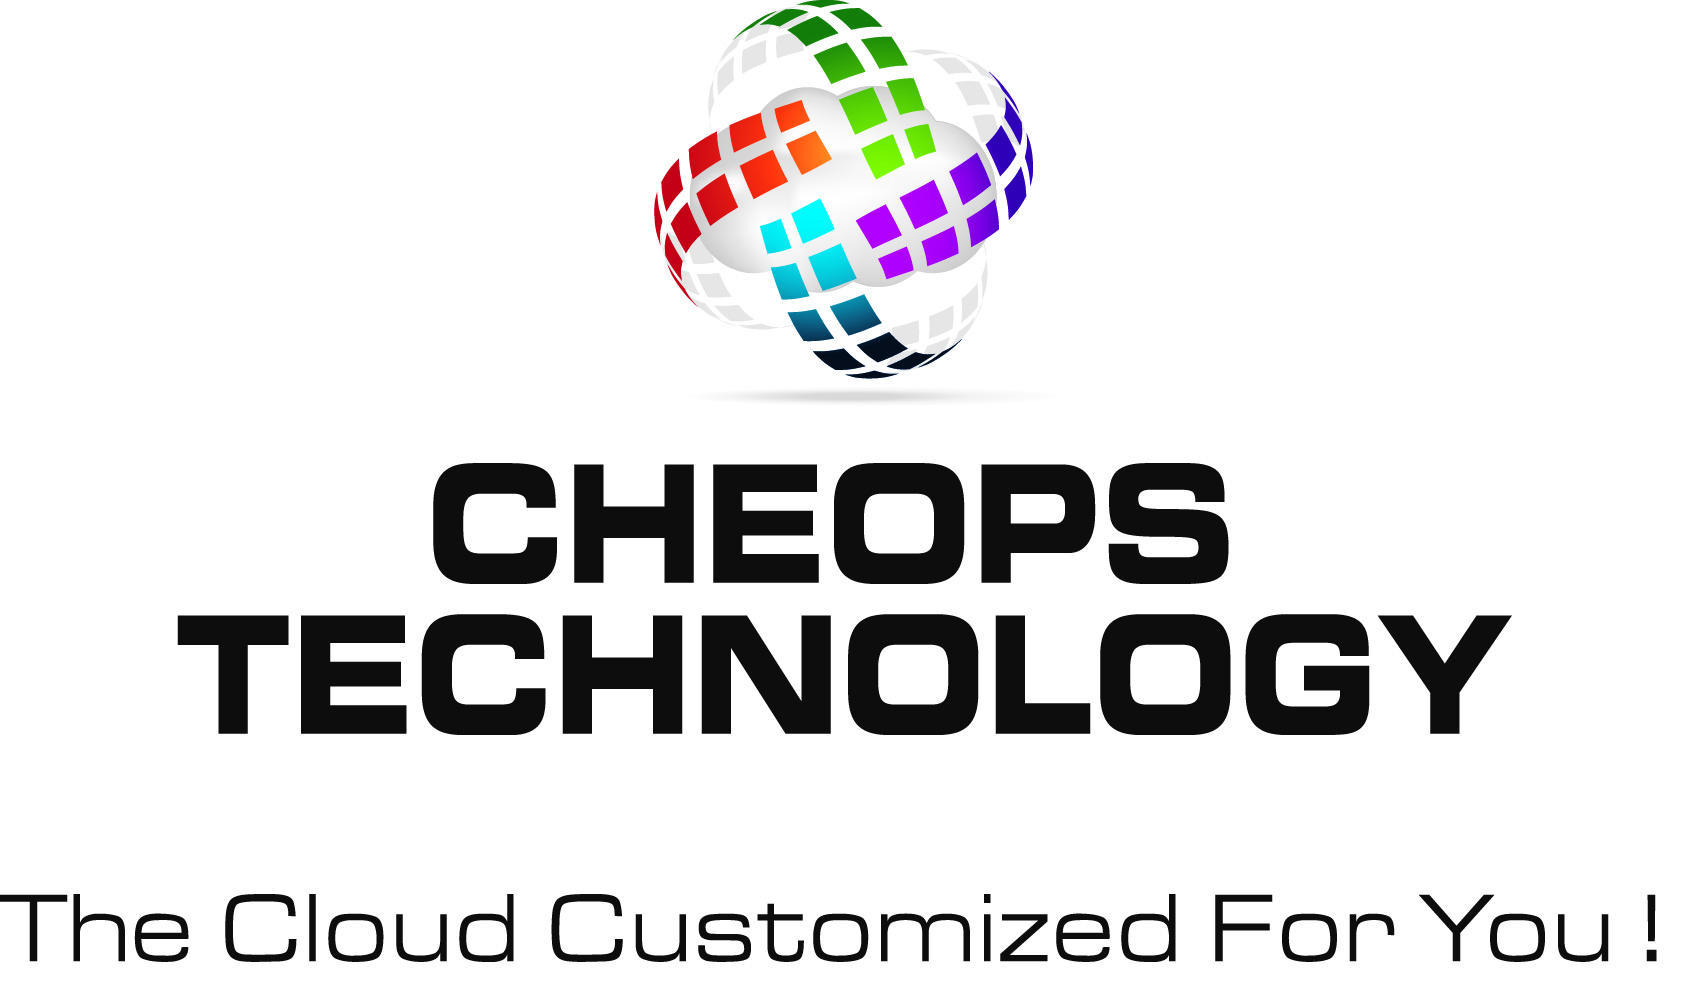 CHEOPS TECHNOLOGY no